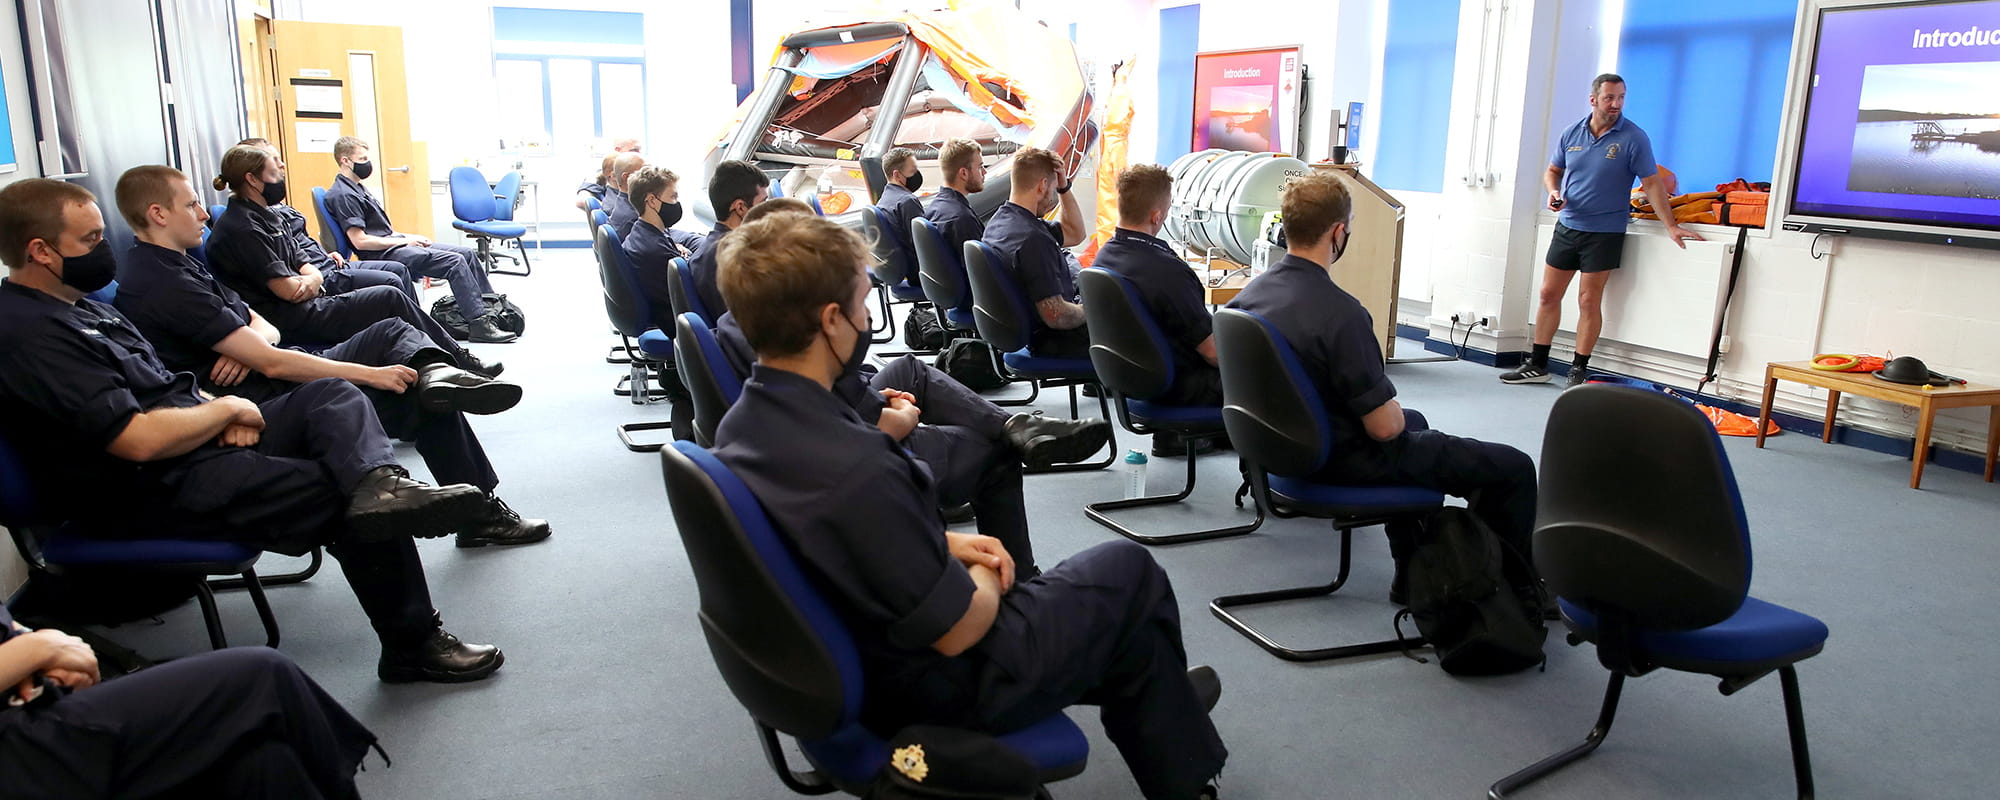 Royal Navy Reserve Officer Cadets sitting in a classroom watching the instructor